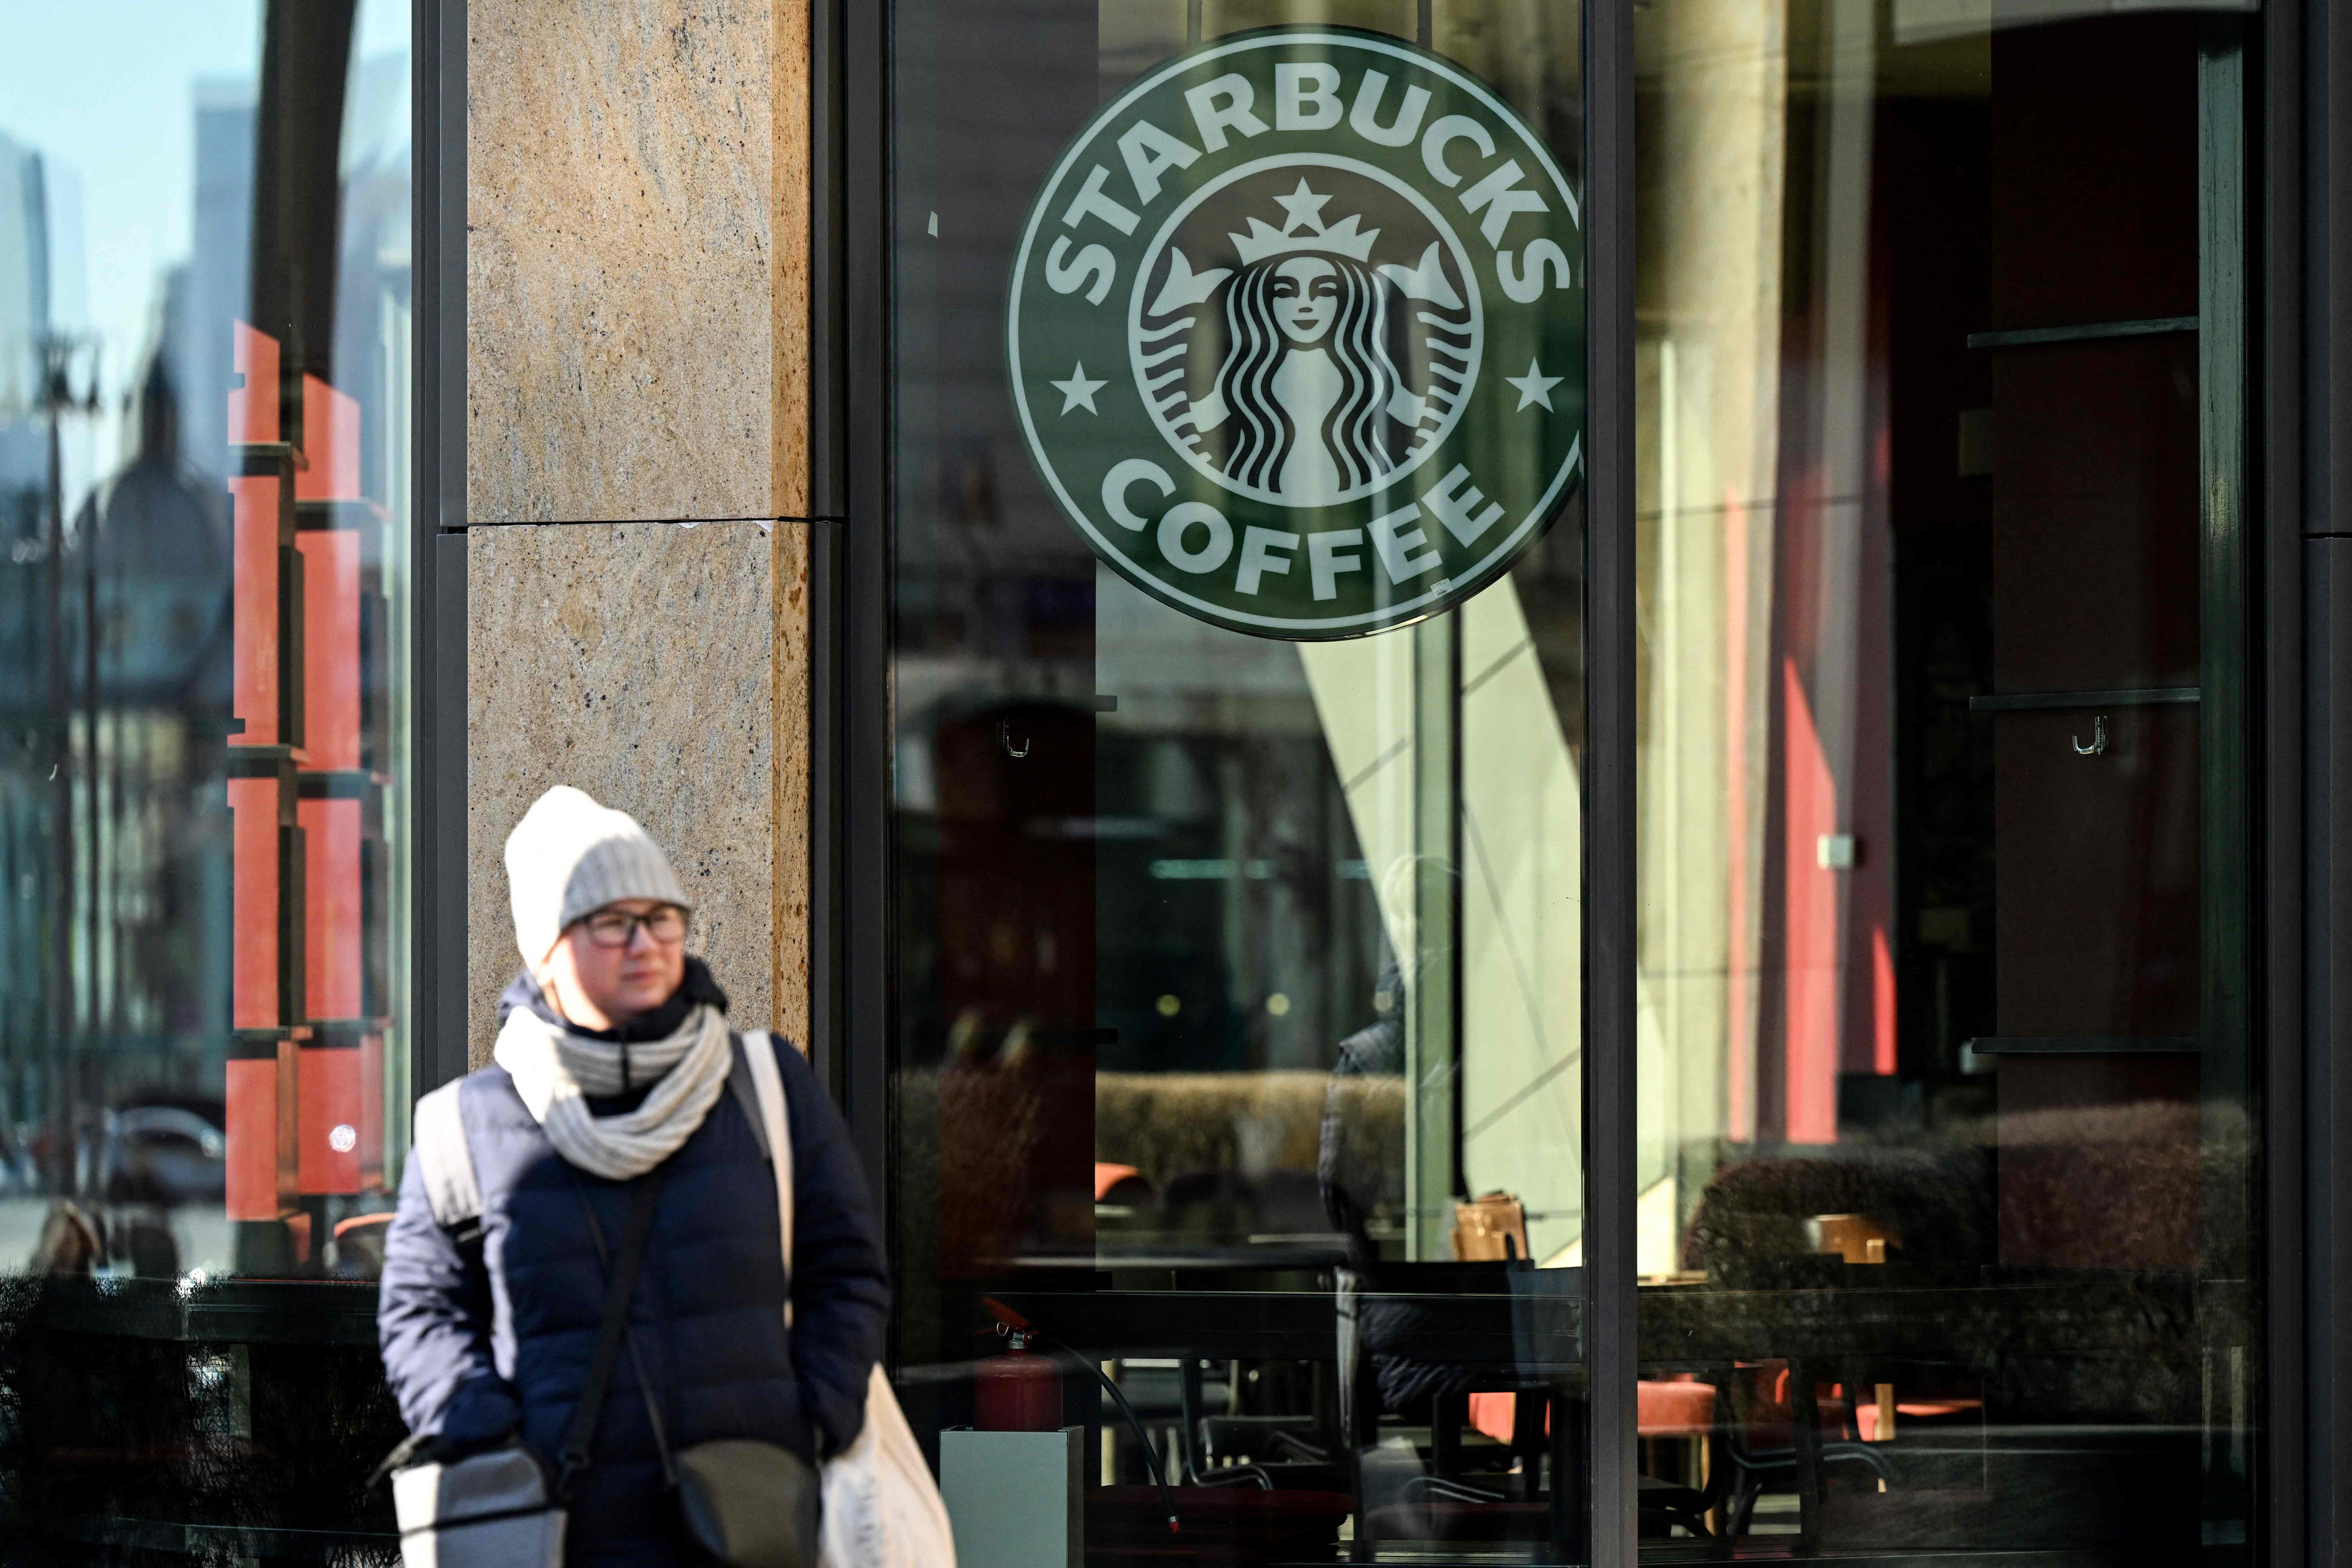 A Starbucks shop in Moscow